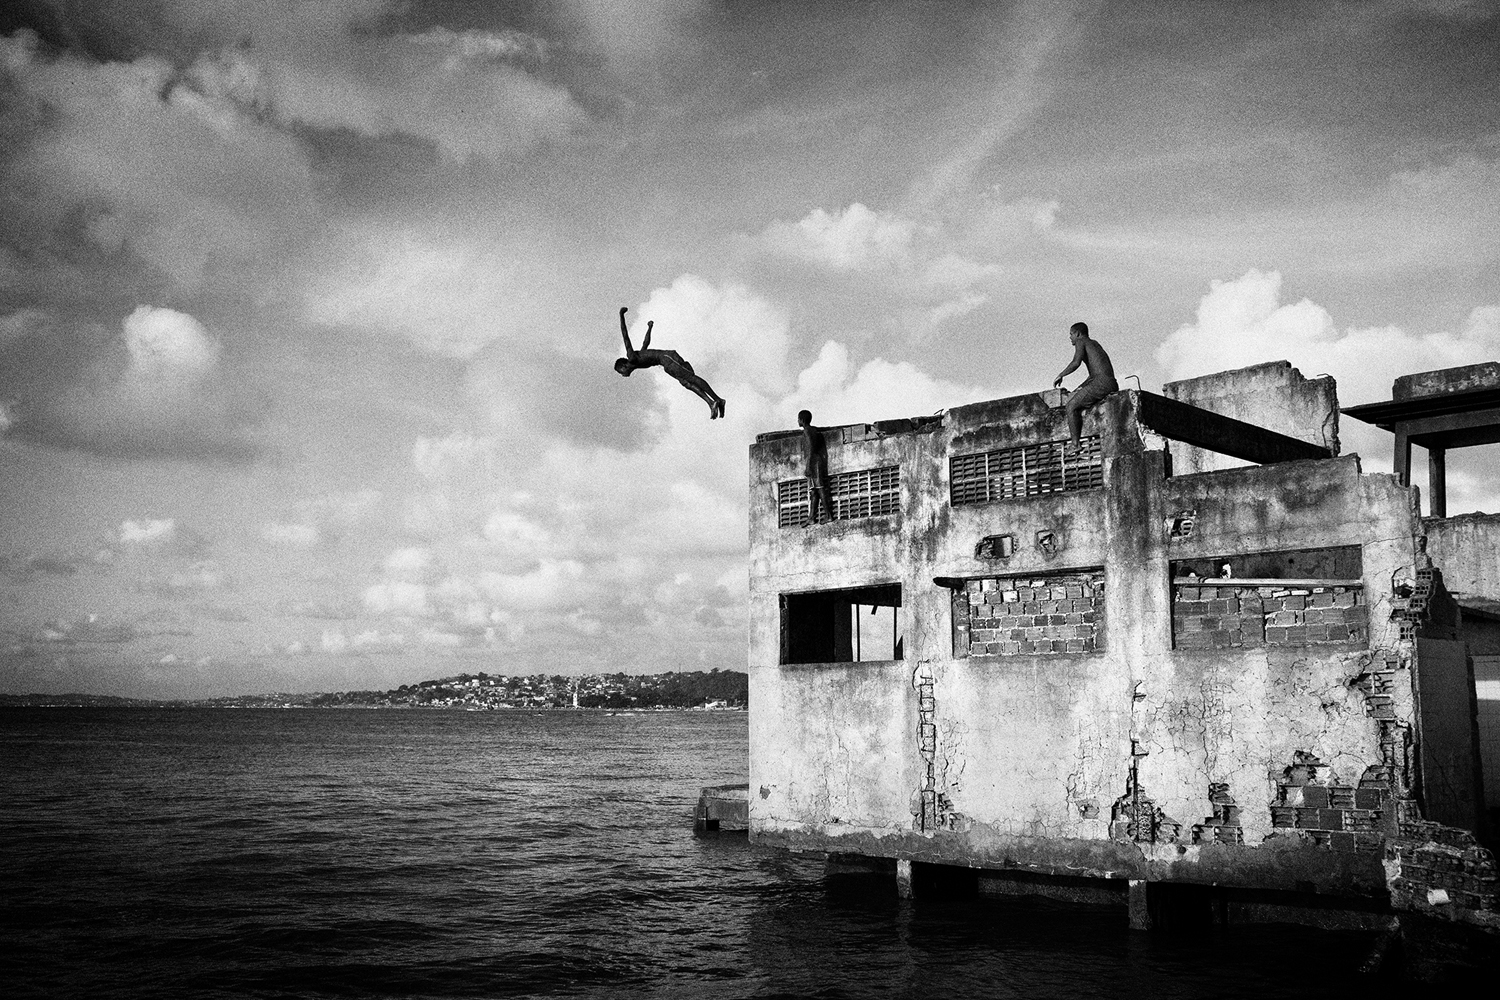 SALVADOR DE BAHIA, BRAZIL – MARCH 20, 2011: A boy jumping from a building of the abandonated chocolate factory, on March 20, 2011 in Salvador de Bahia, Brazil. Despite the lack of socio-economic support from the government, they have managed to make a safe place for themselves to live, and form a community of their own, which is safer that the alternatives available to them. However they are currently being evicted by the government due to being there illegally. (Photo by Sebastian Liste/Reportage by Getty Images)